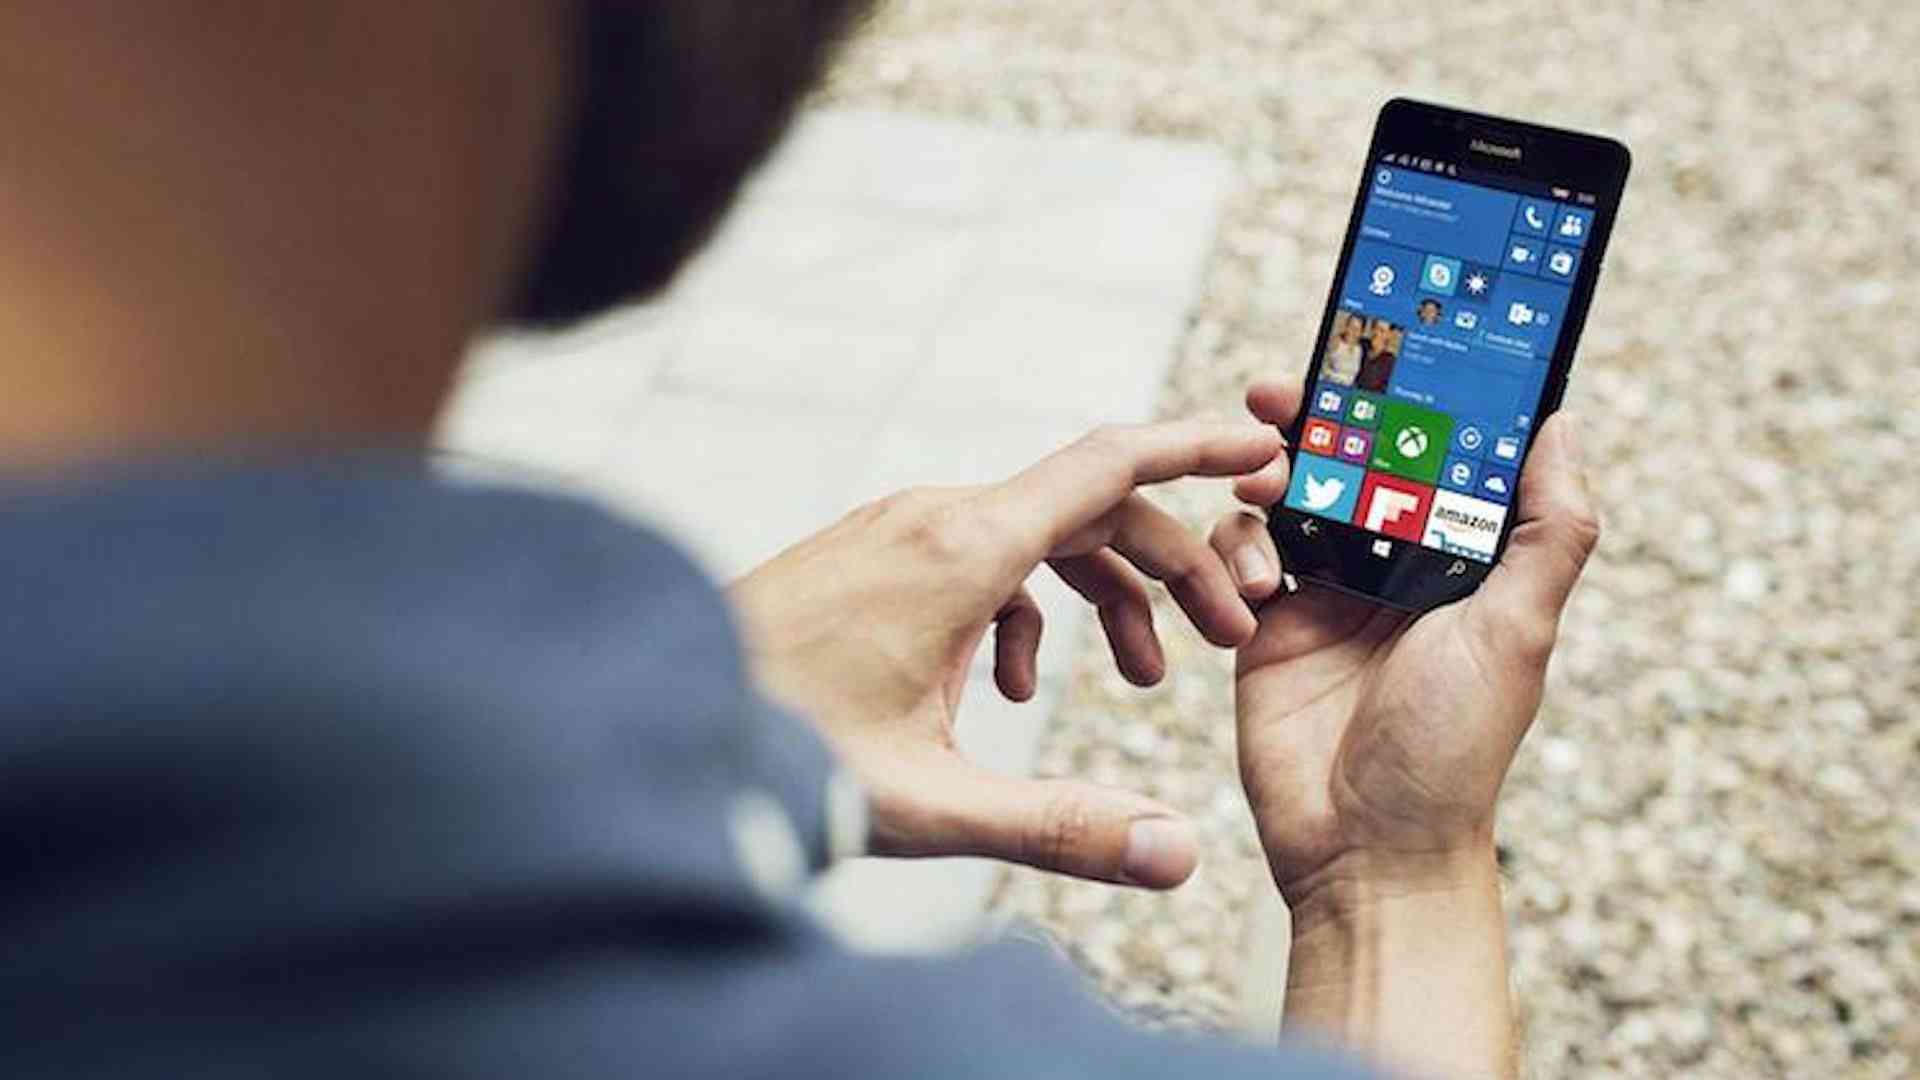 windows 10 mobile is going to die in few months 1432 big 1